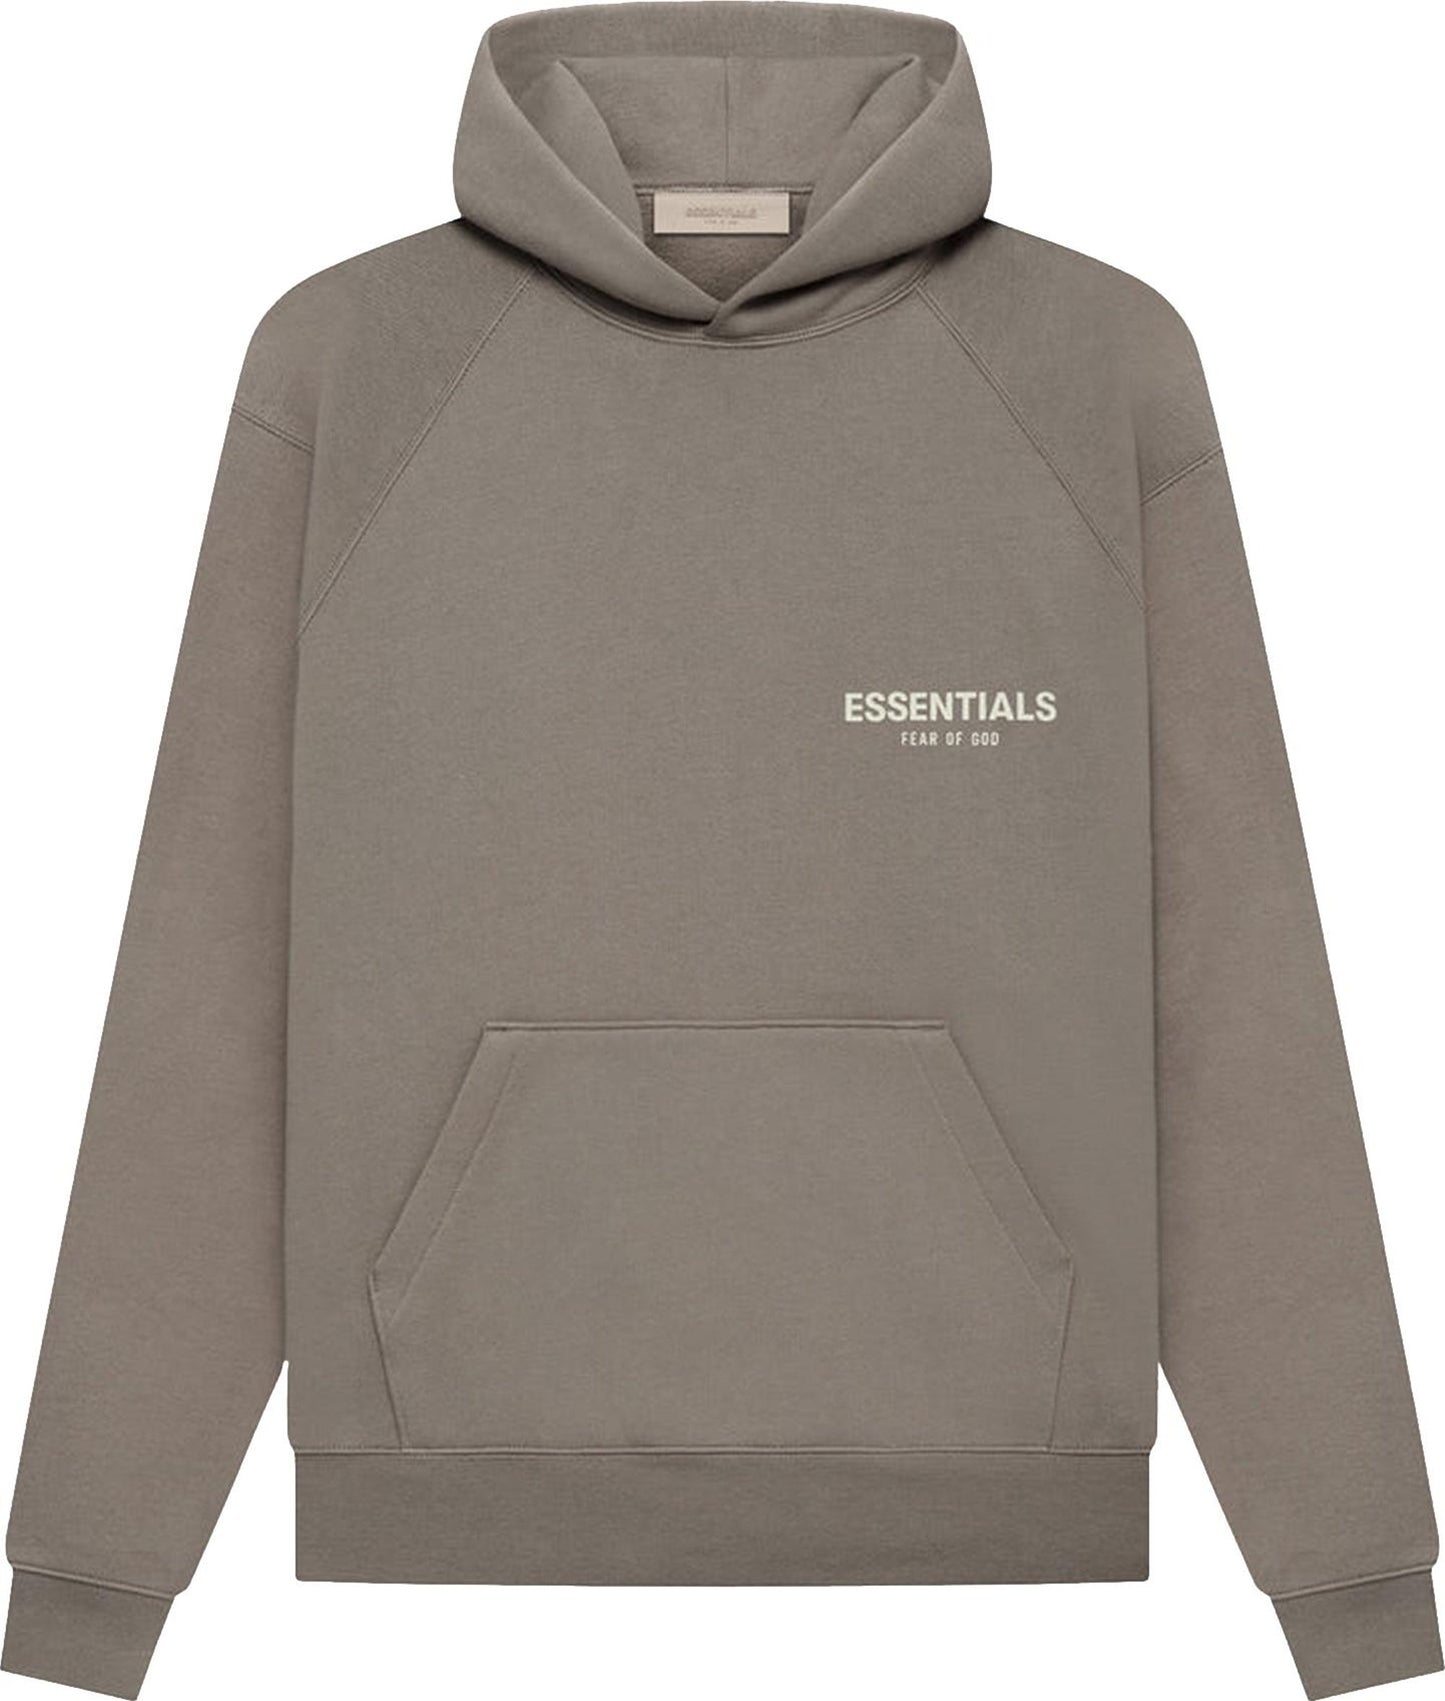 Fear of God Essentials Hoodie Desert Taupe - SS22